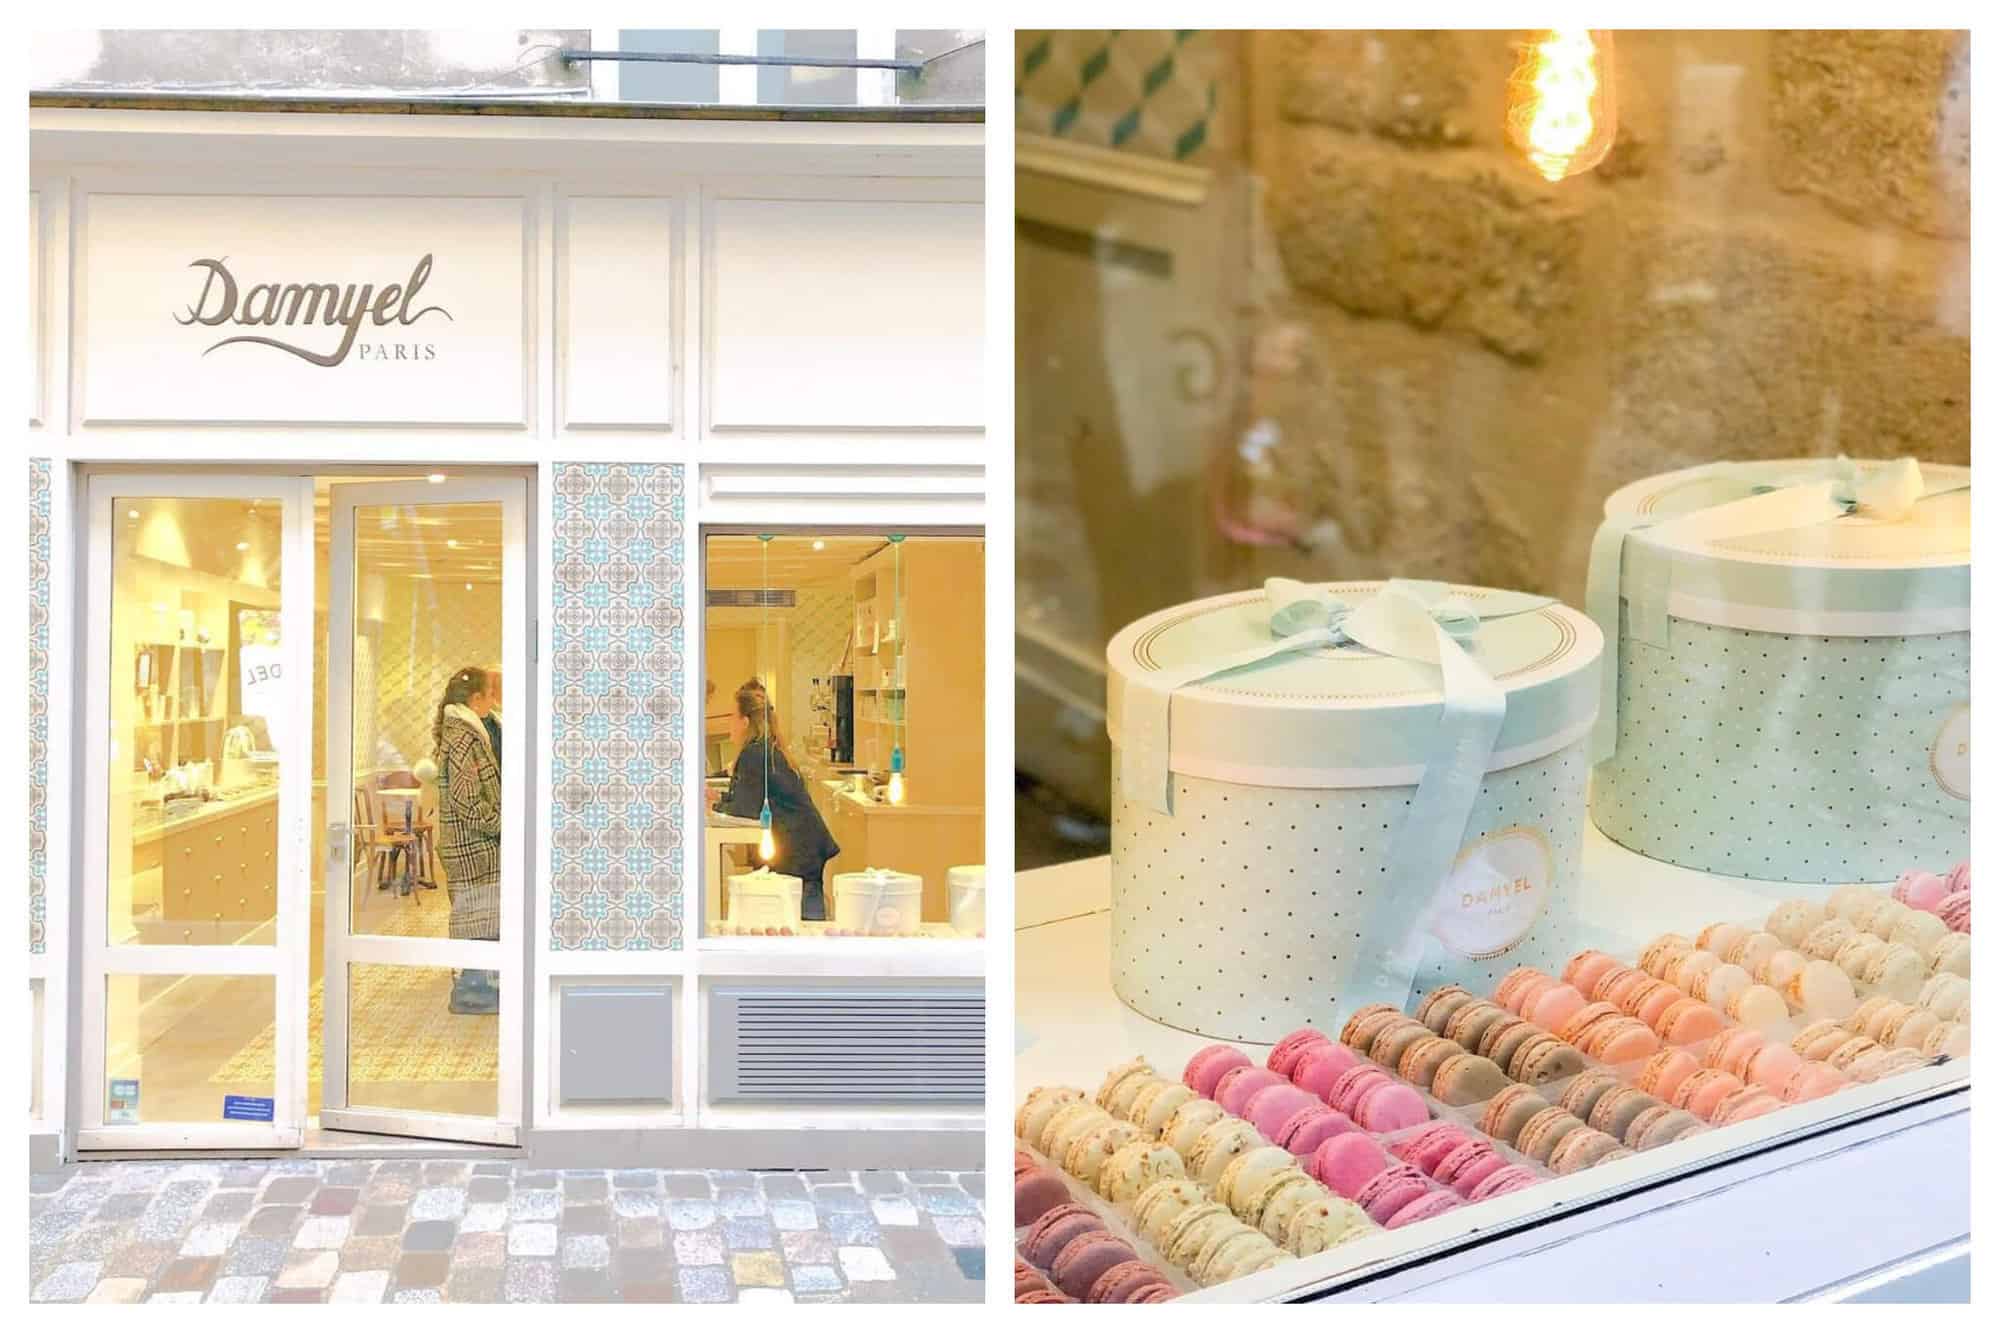 Left: The outside of Damyel in Paris. Right: The window front of Damyel in Paris, with assorted macarons pictured. 